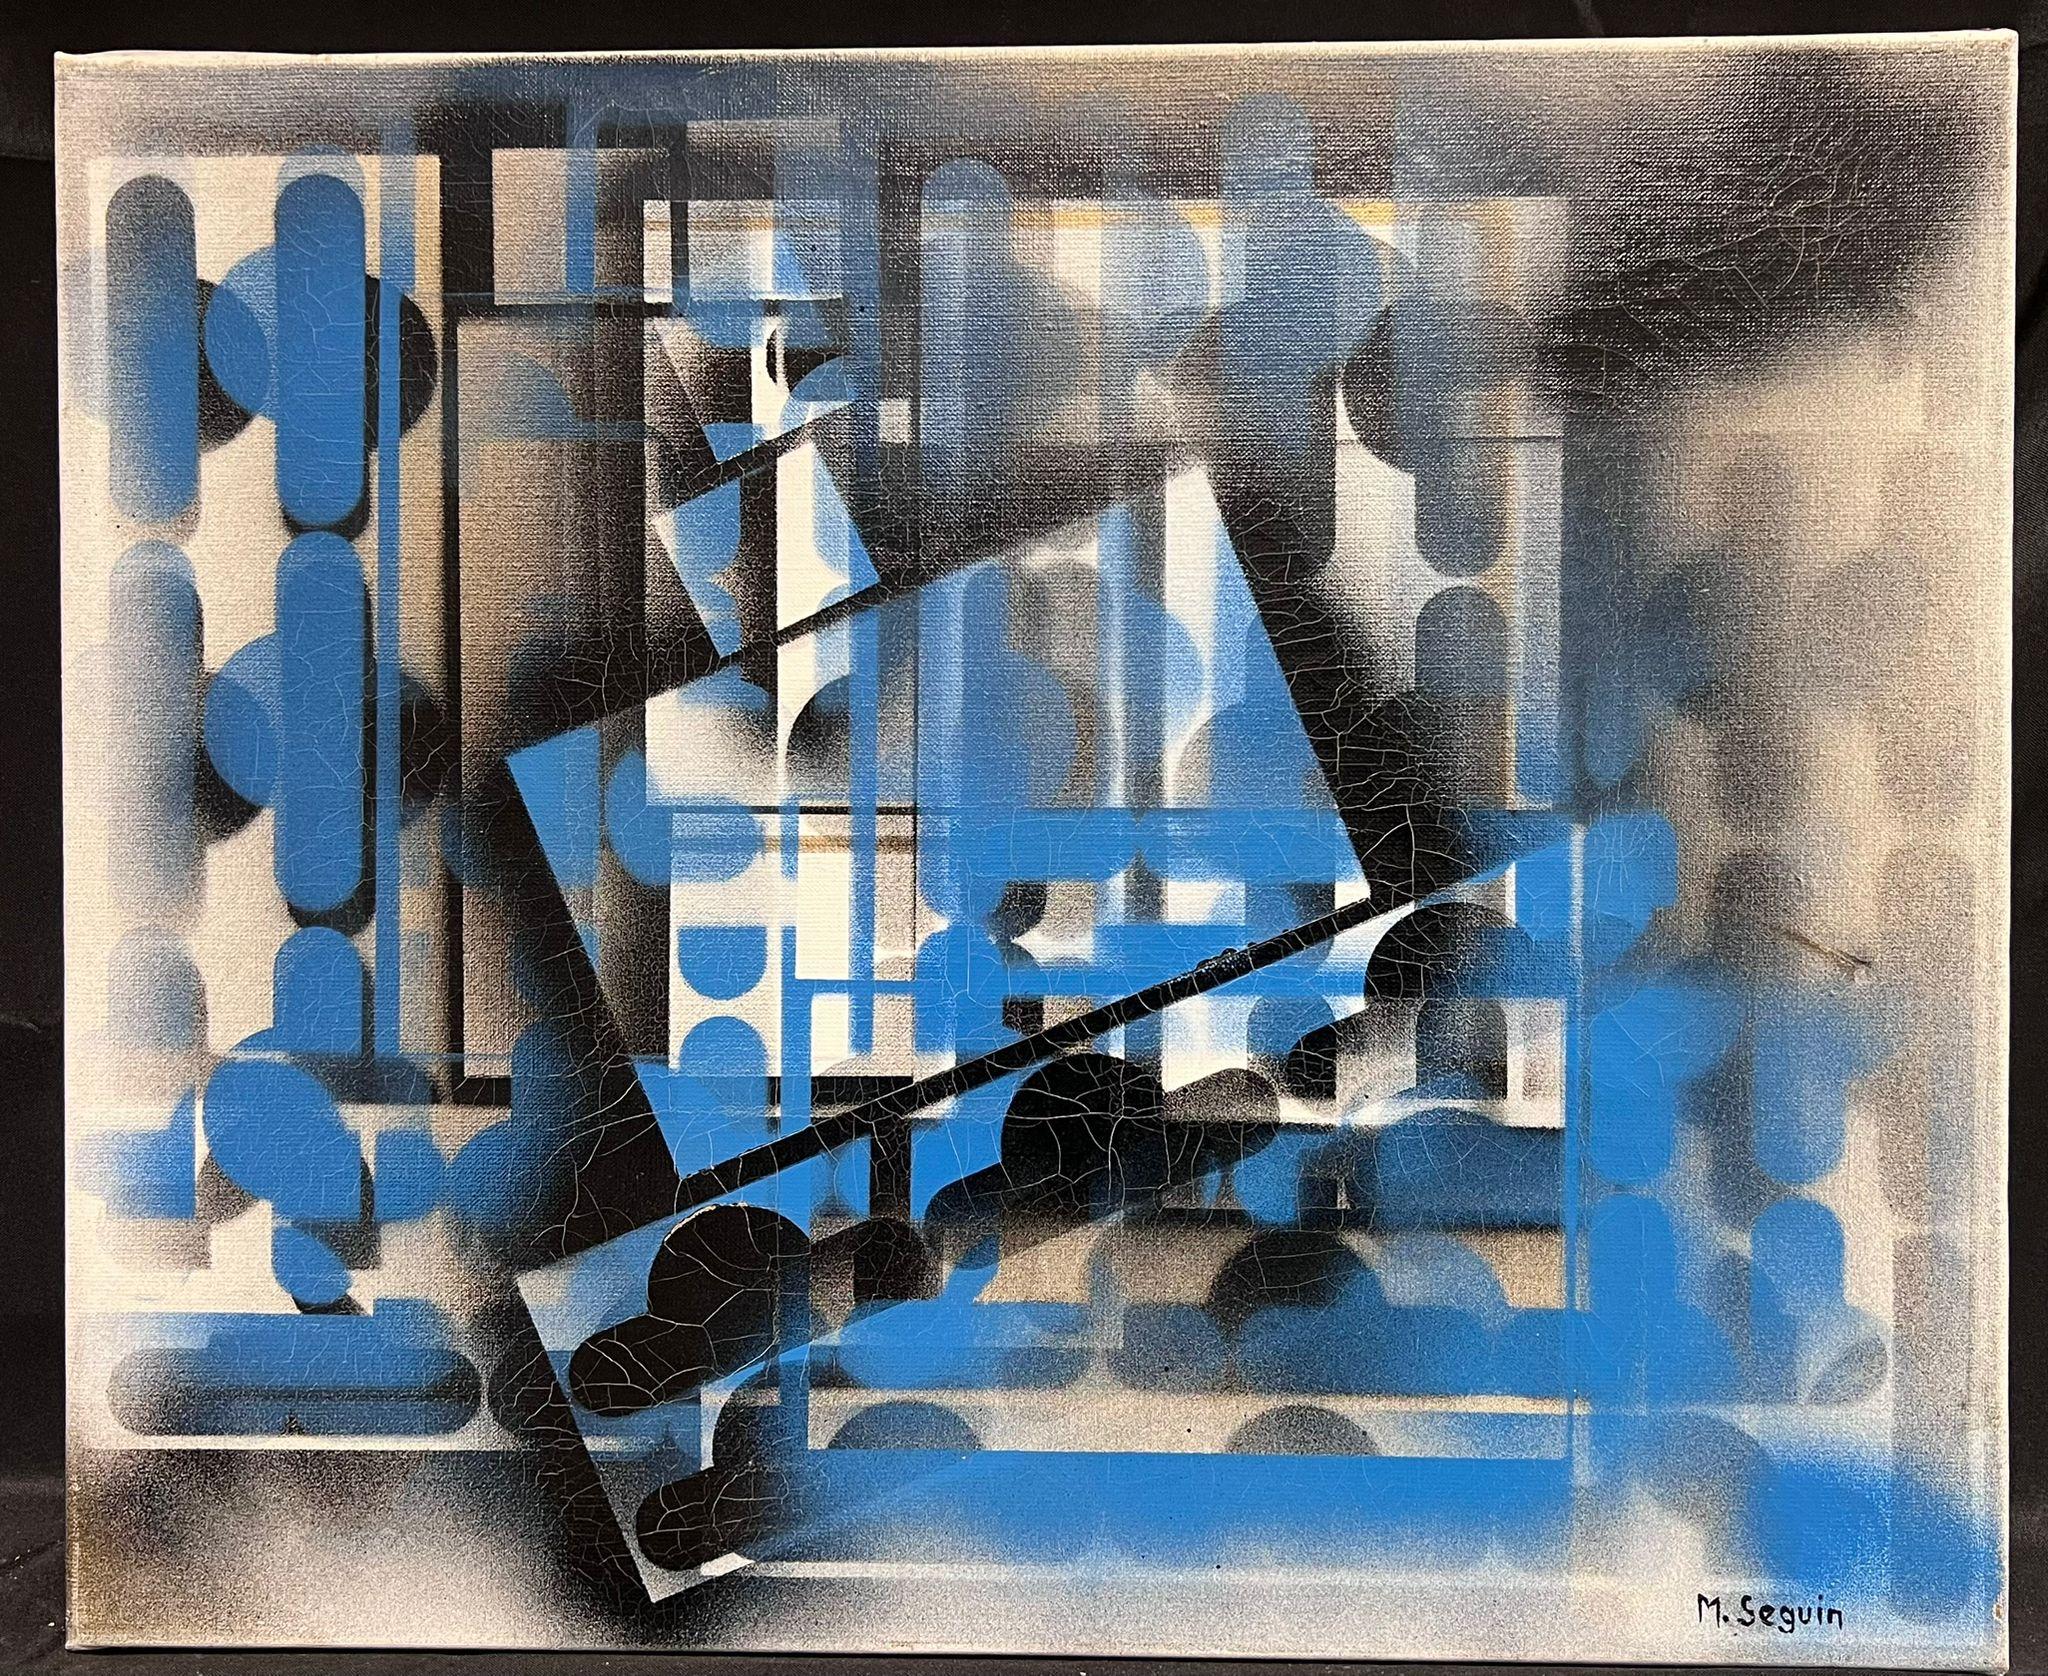 Abstract Composition
by Michel Seguin (French contemporary)
signed, paint on canvas, unframed
canvas: 25.5 x 21.5 inches
provenance: private collection, Paris
condition: very good and sound condition